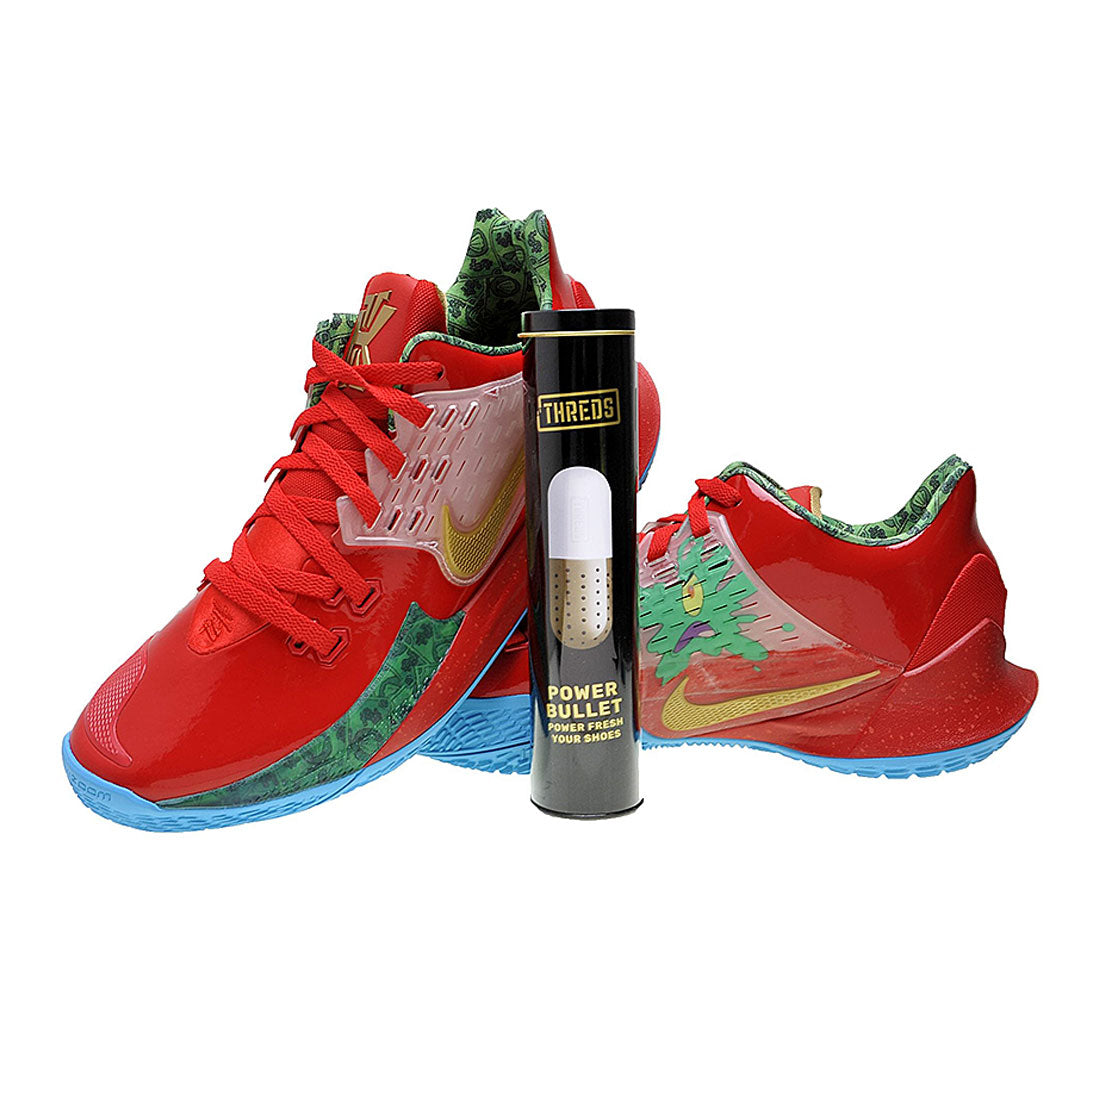 Threds Power Bullet Shoe Care